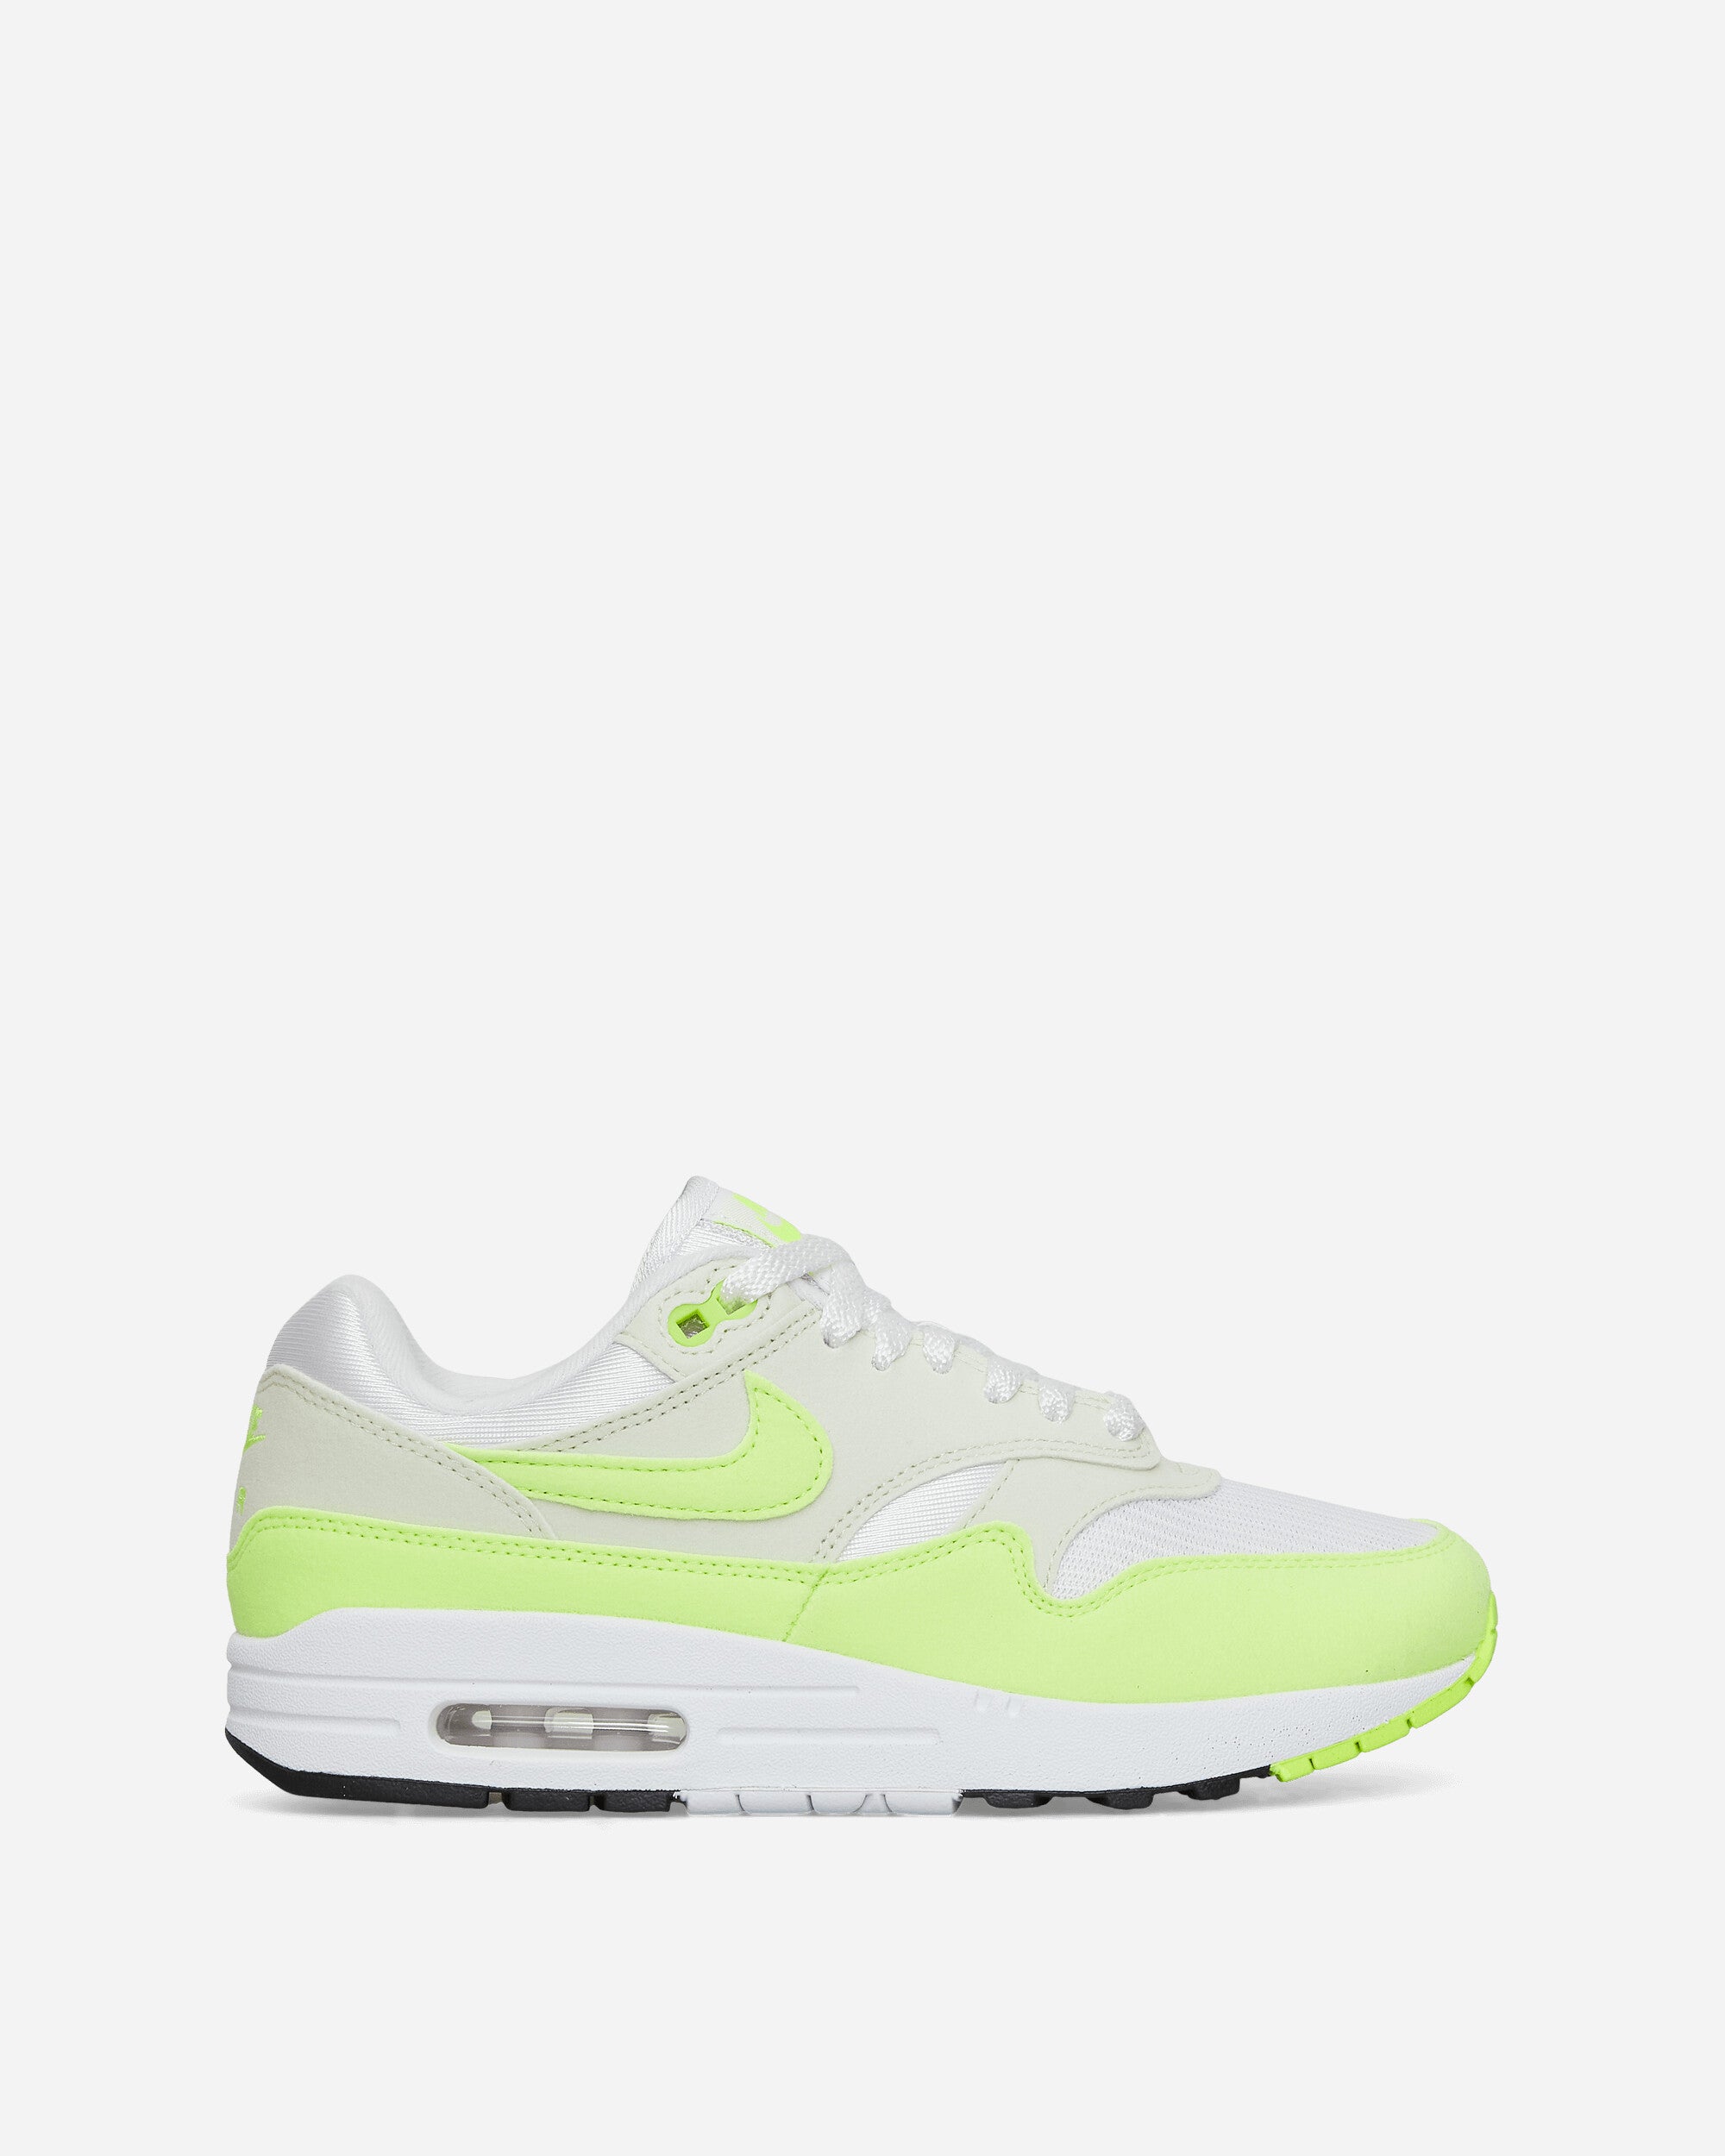 WMNS Nike Air Max 1 Sneakers White / Volt